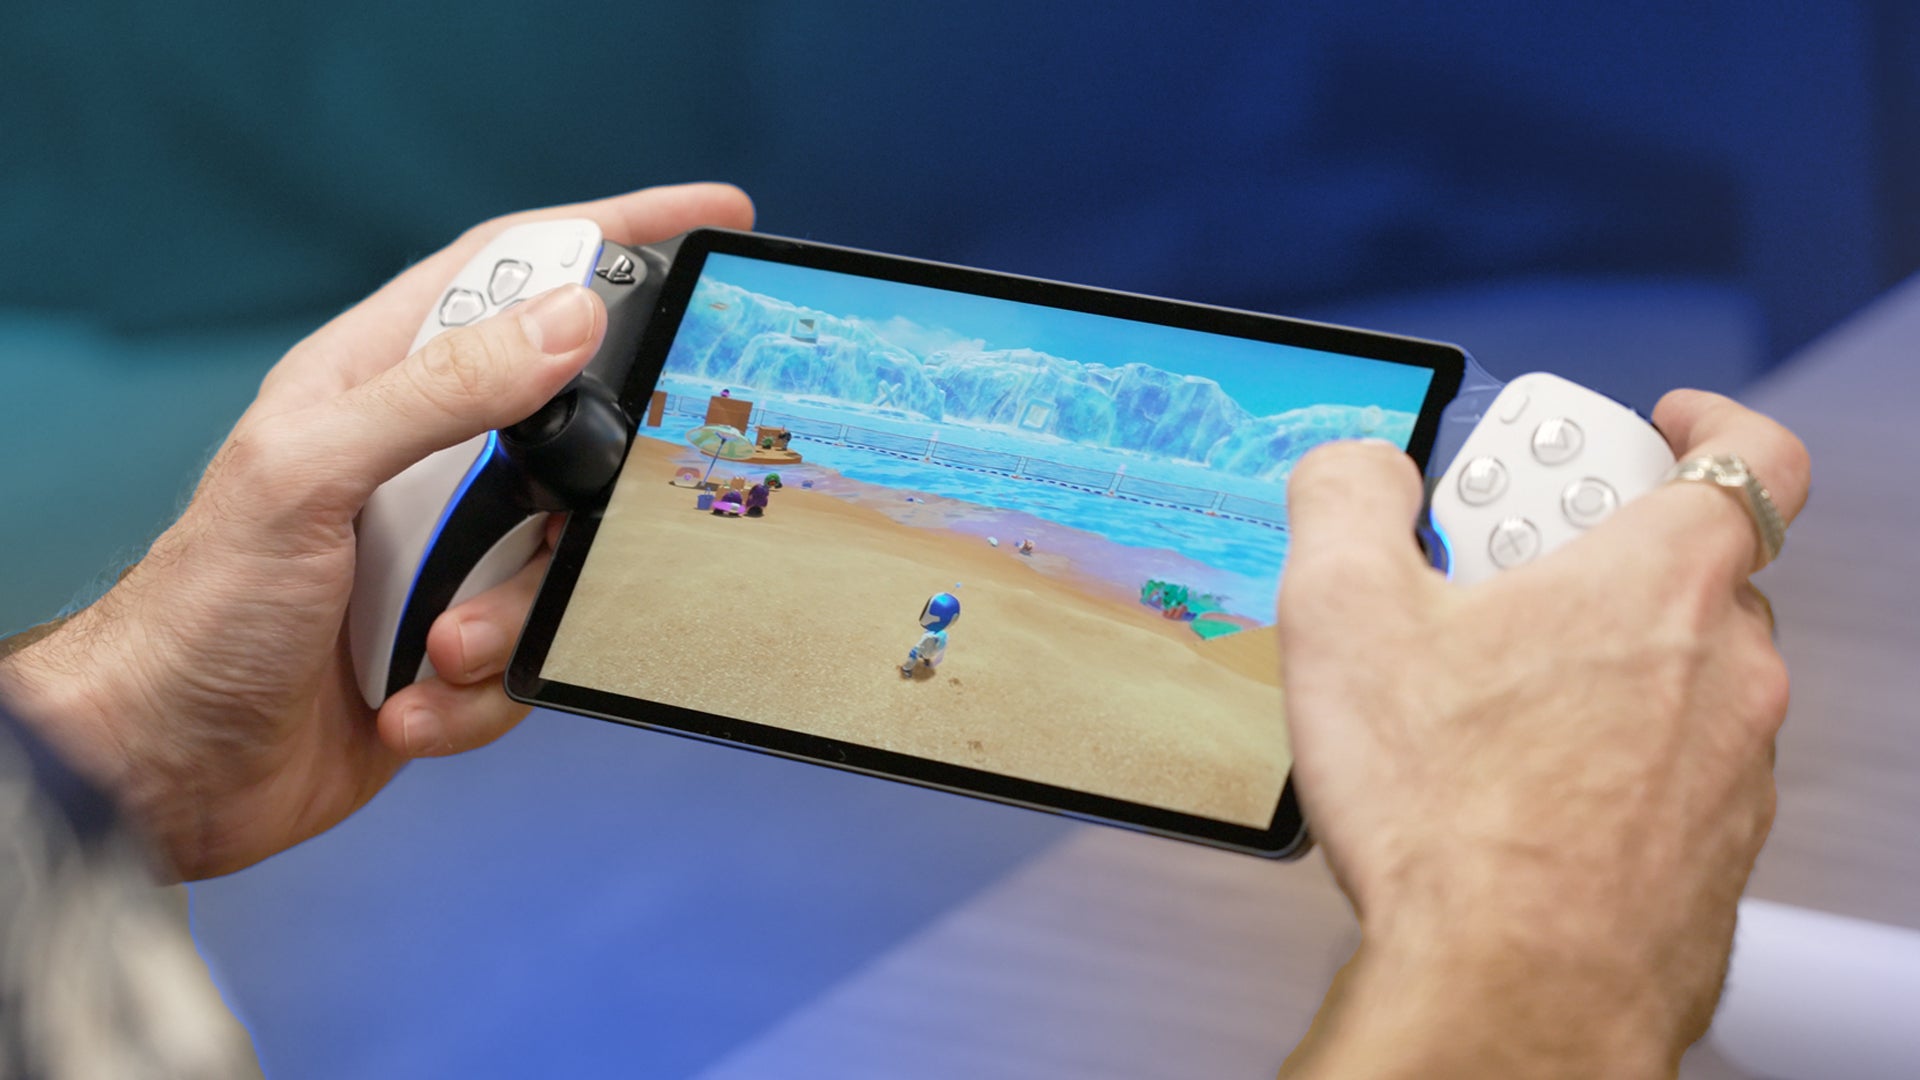 Xperia Tablets With Remote Play Support: A Quick Guide